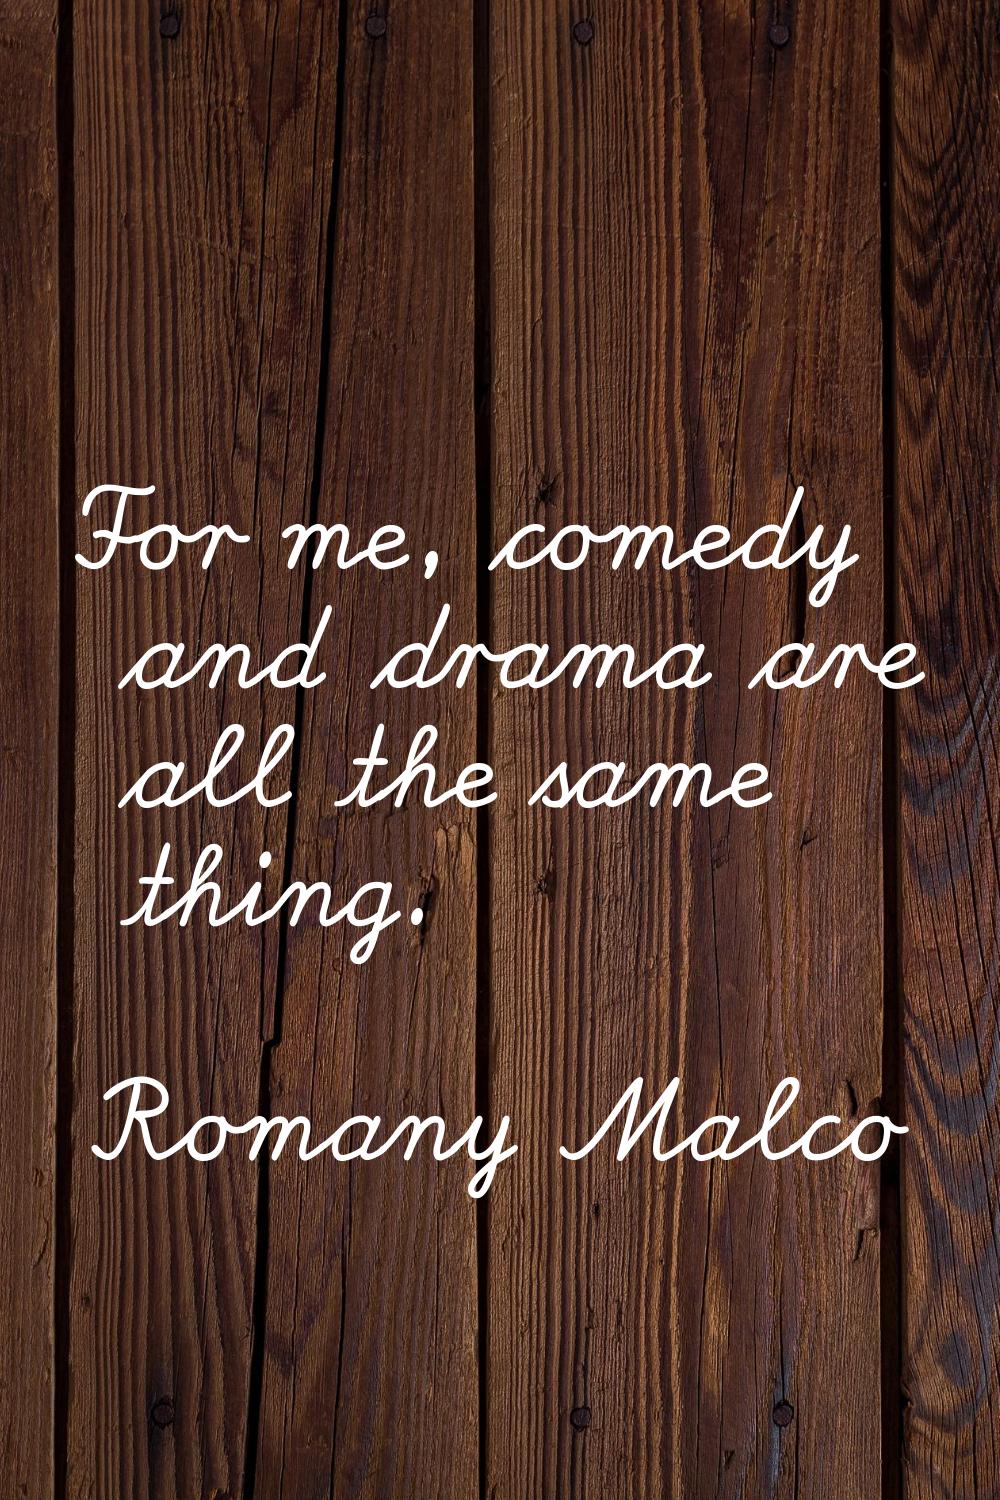 For me, comedy and drama are all the same thing.